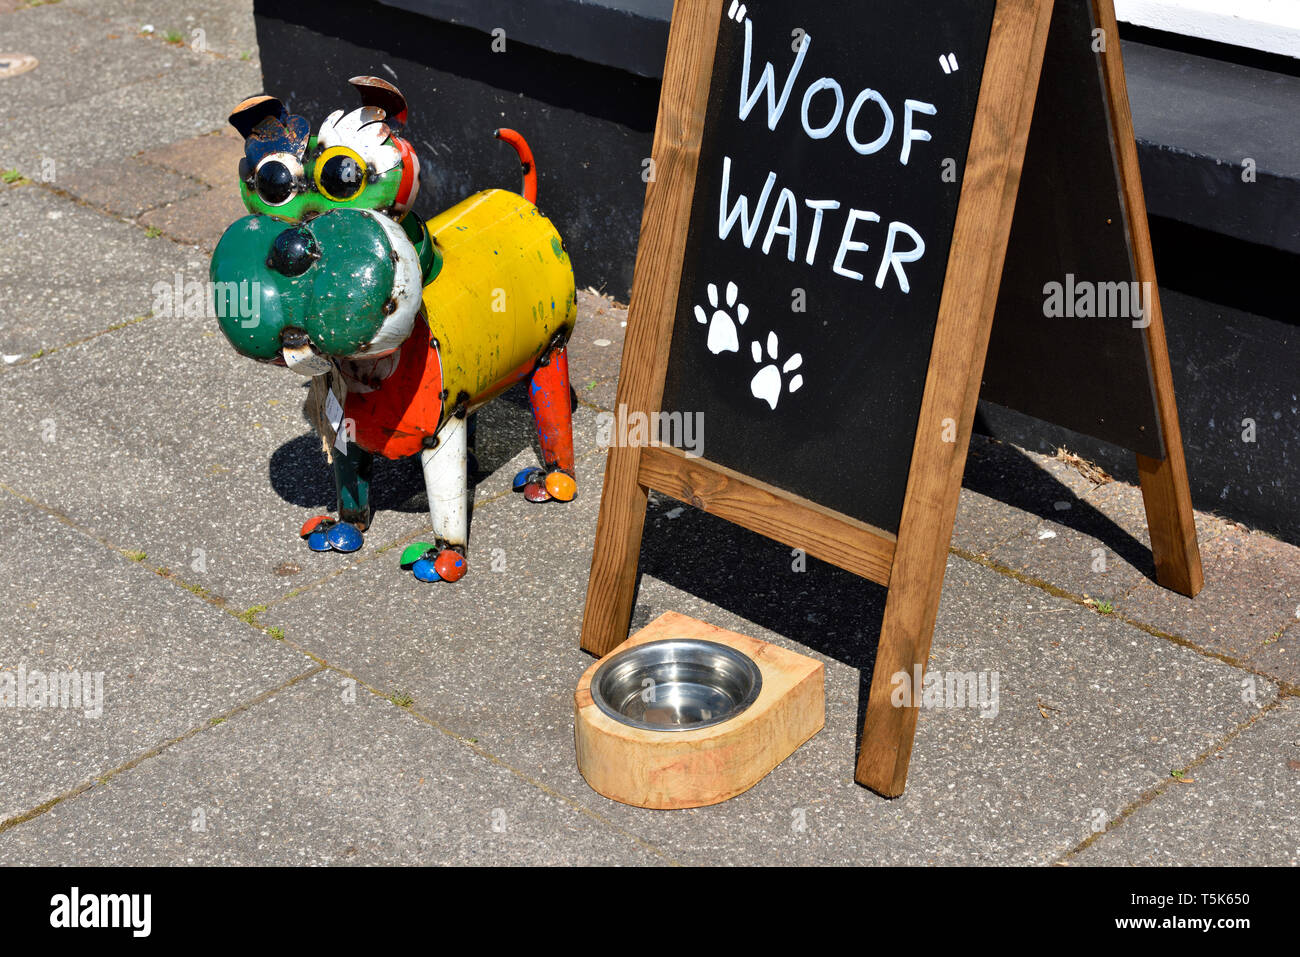 Dog watering dish with sign “Woof Water” outside shop on pavement Stock Photo